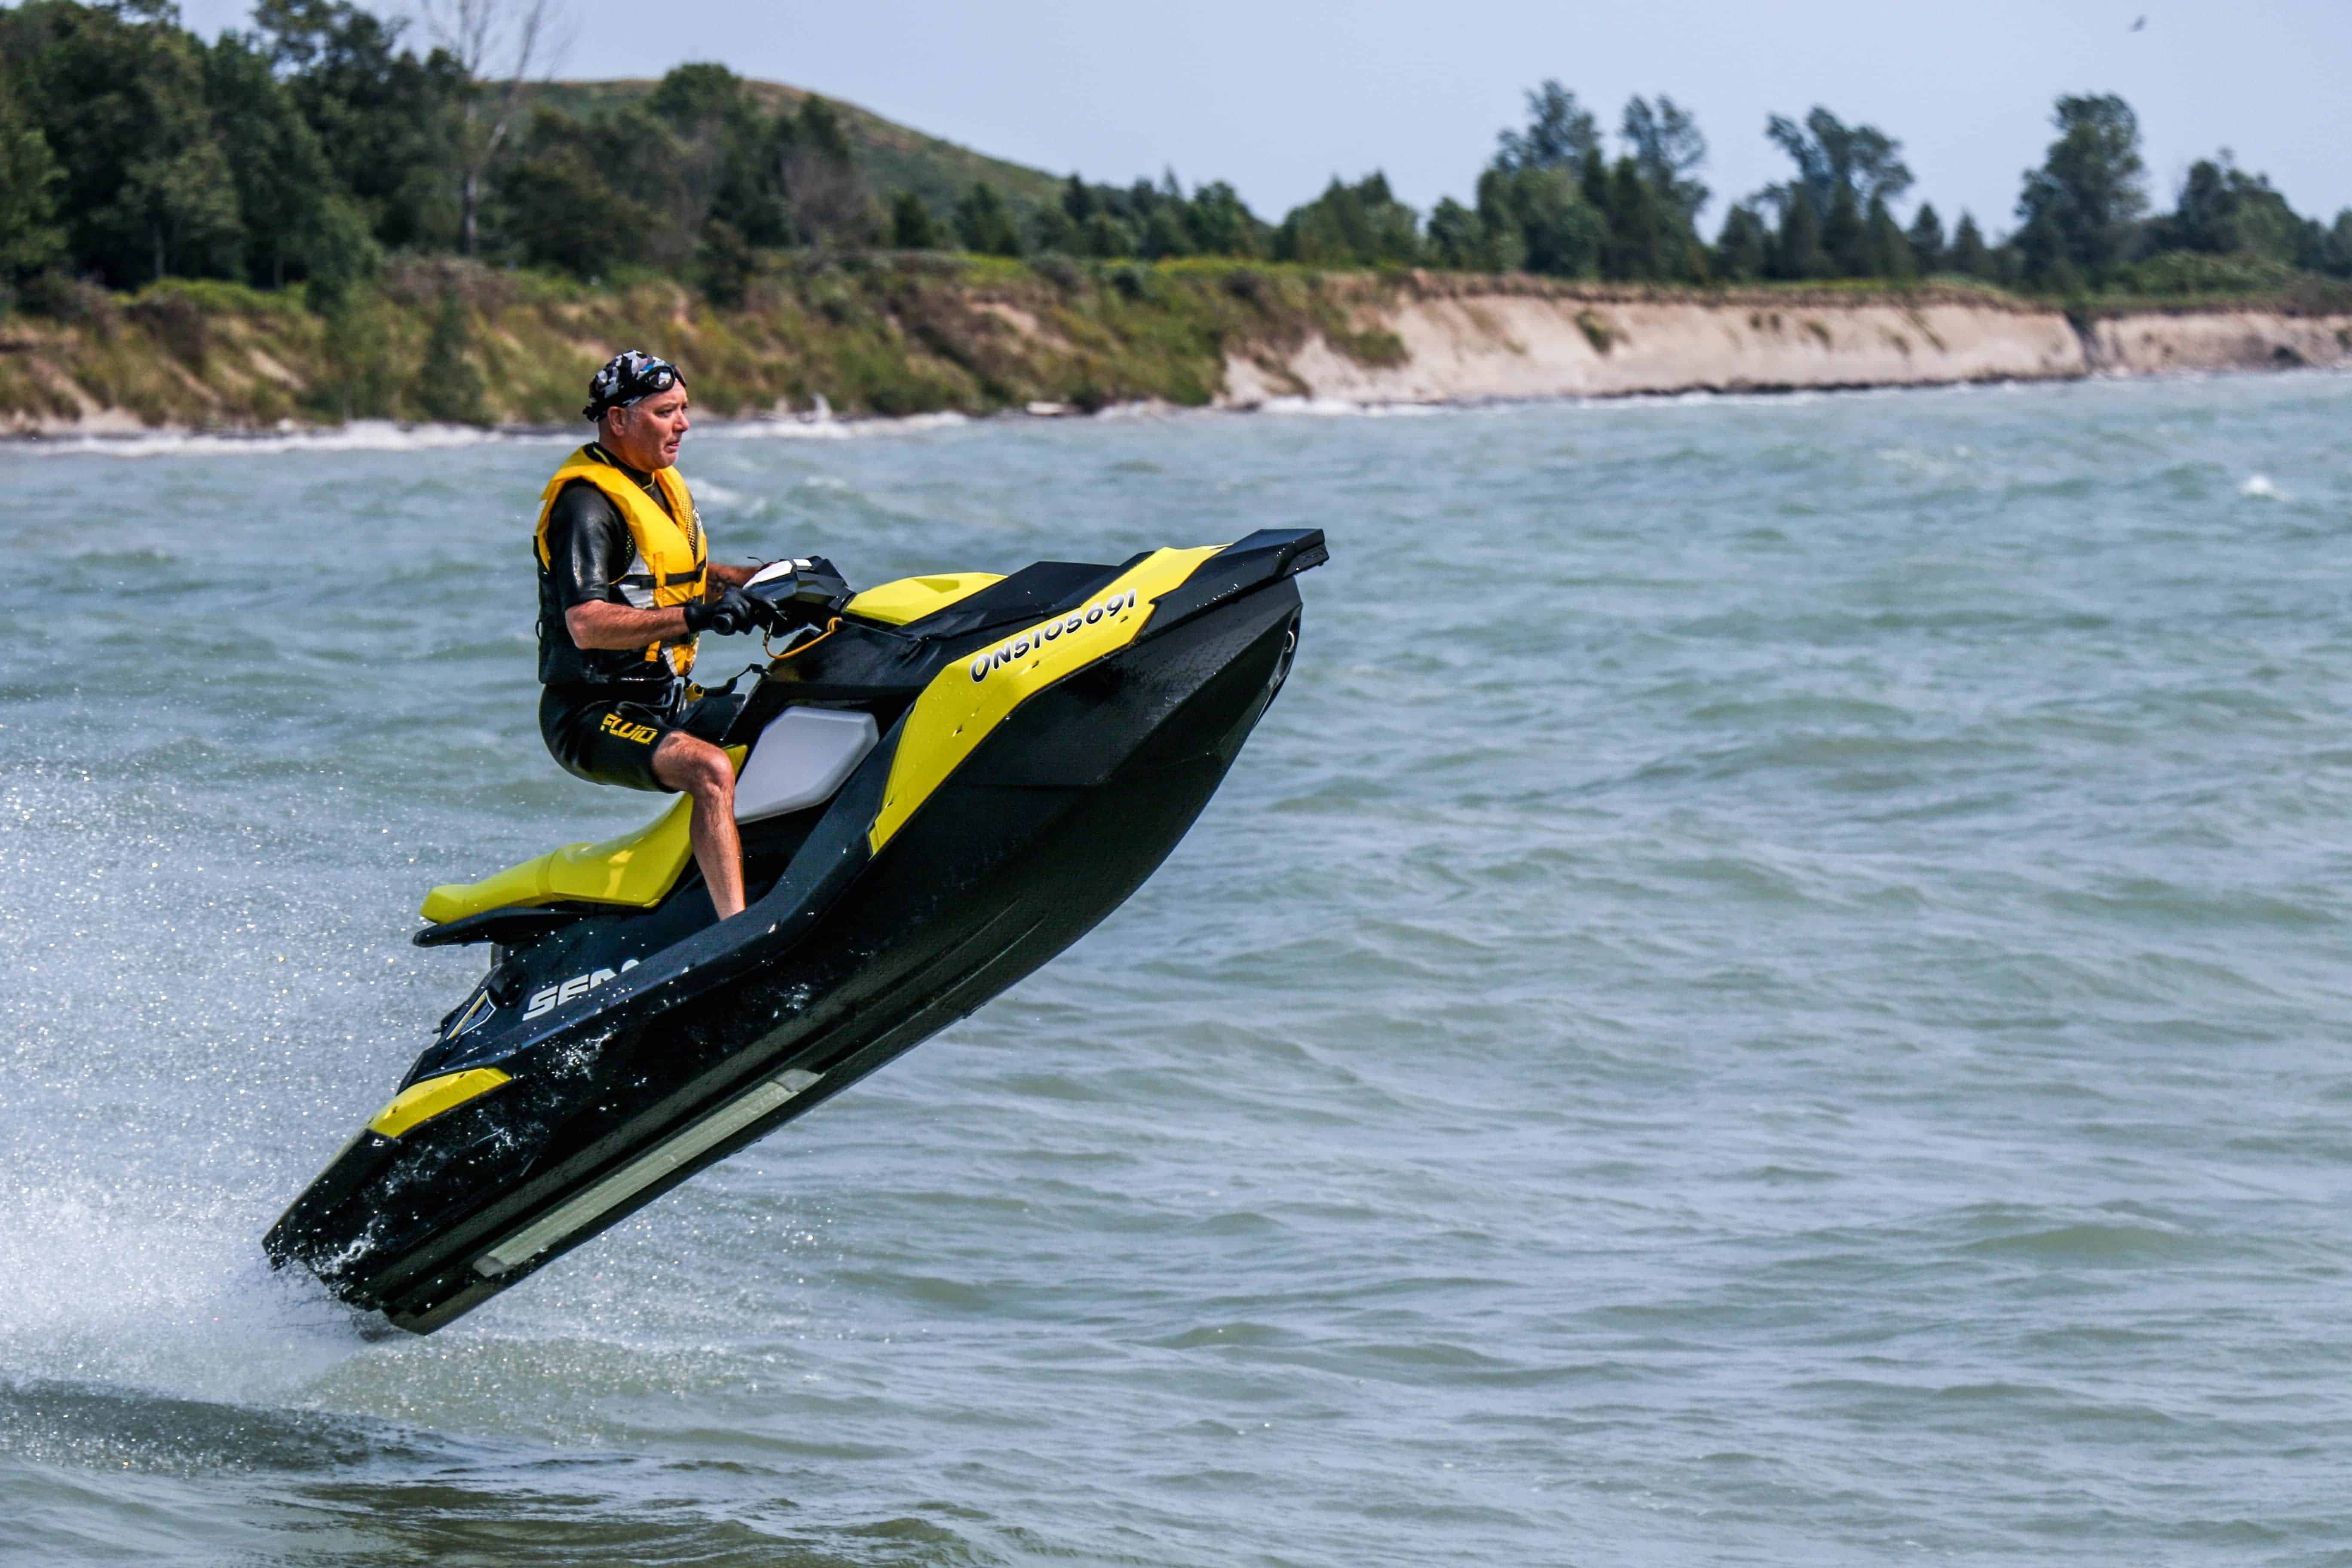 Jet Ski vs Wave Runner: What’s The Difference?